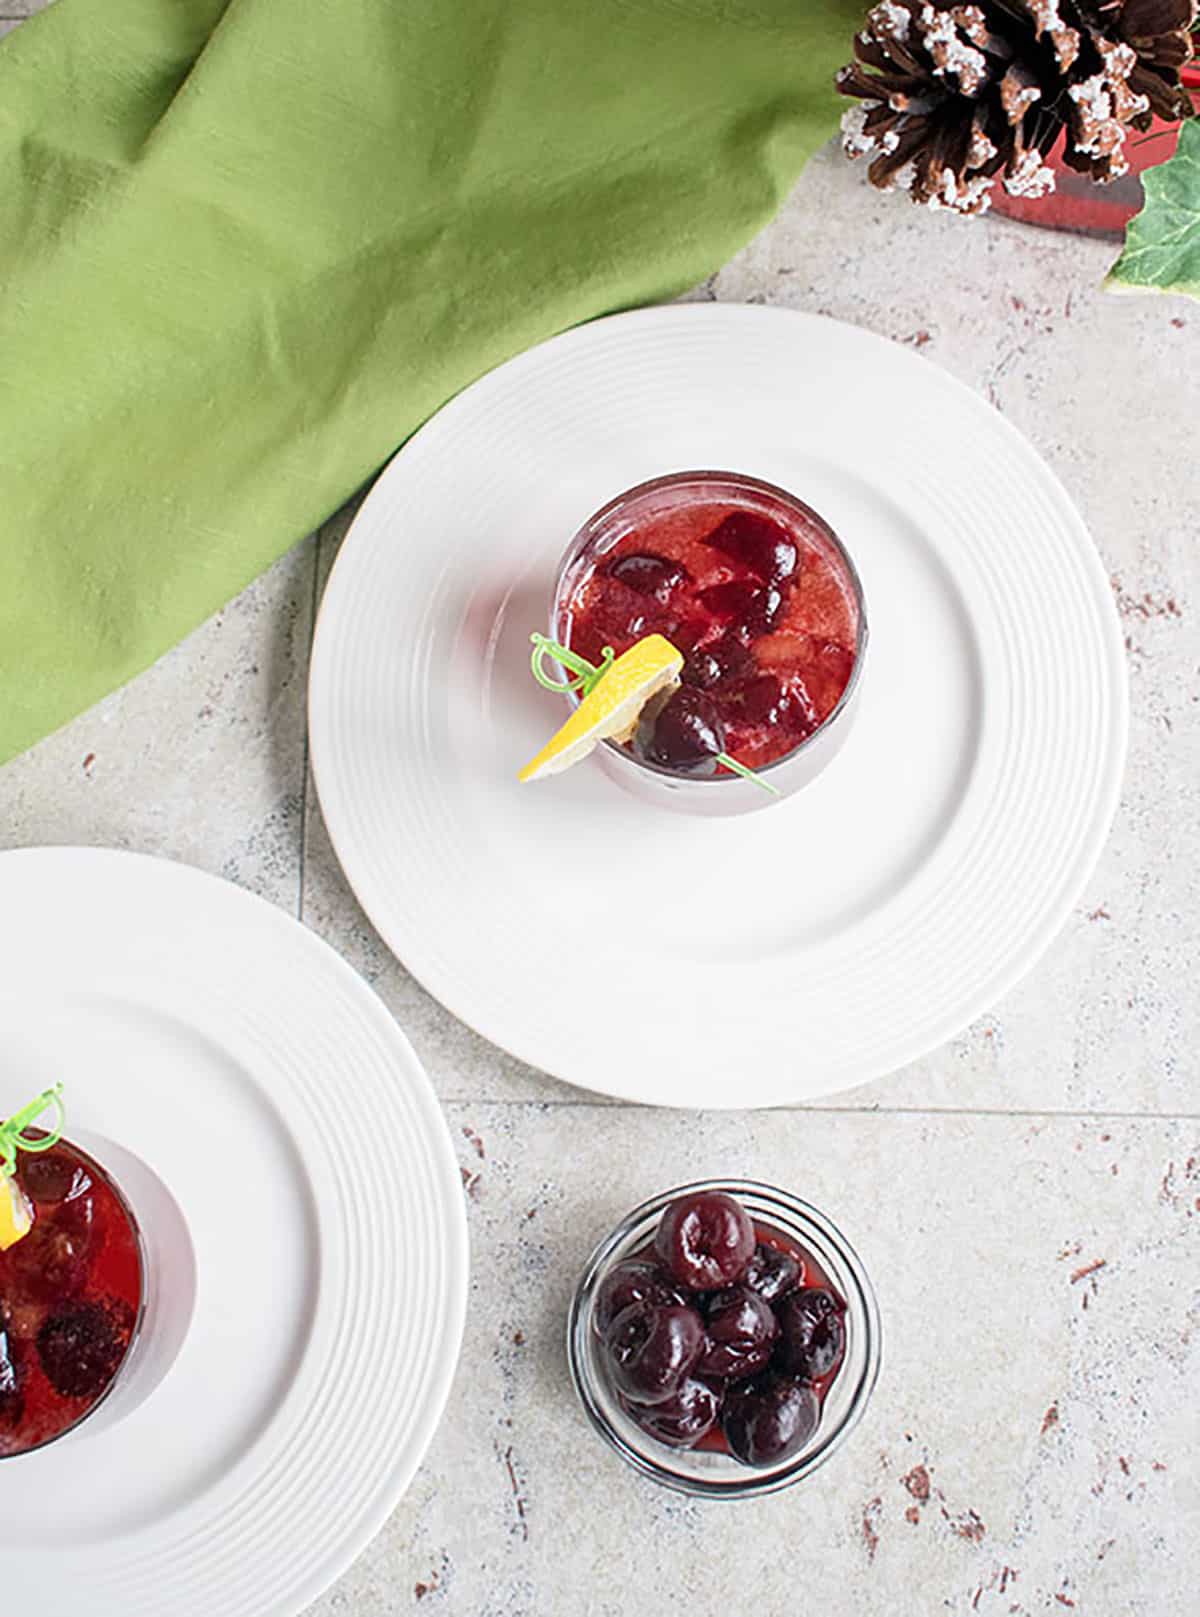 cherry cocktails on plates with lemon and cherry garnishes, bowl of dark cherries